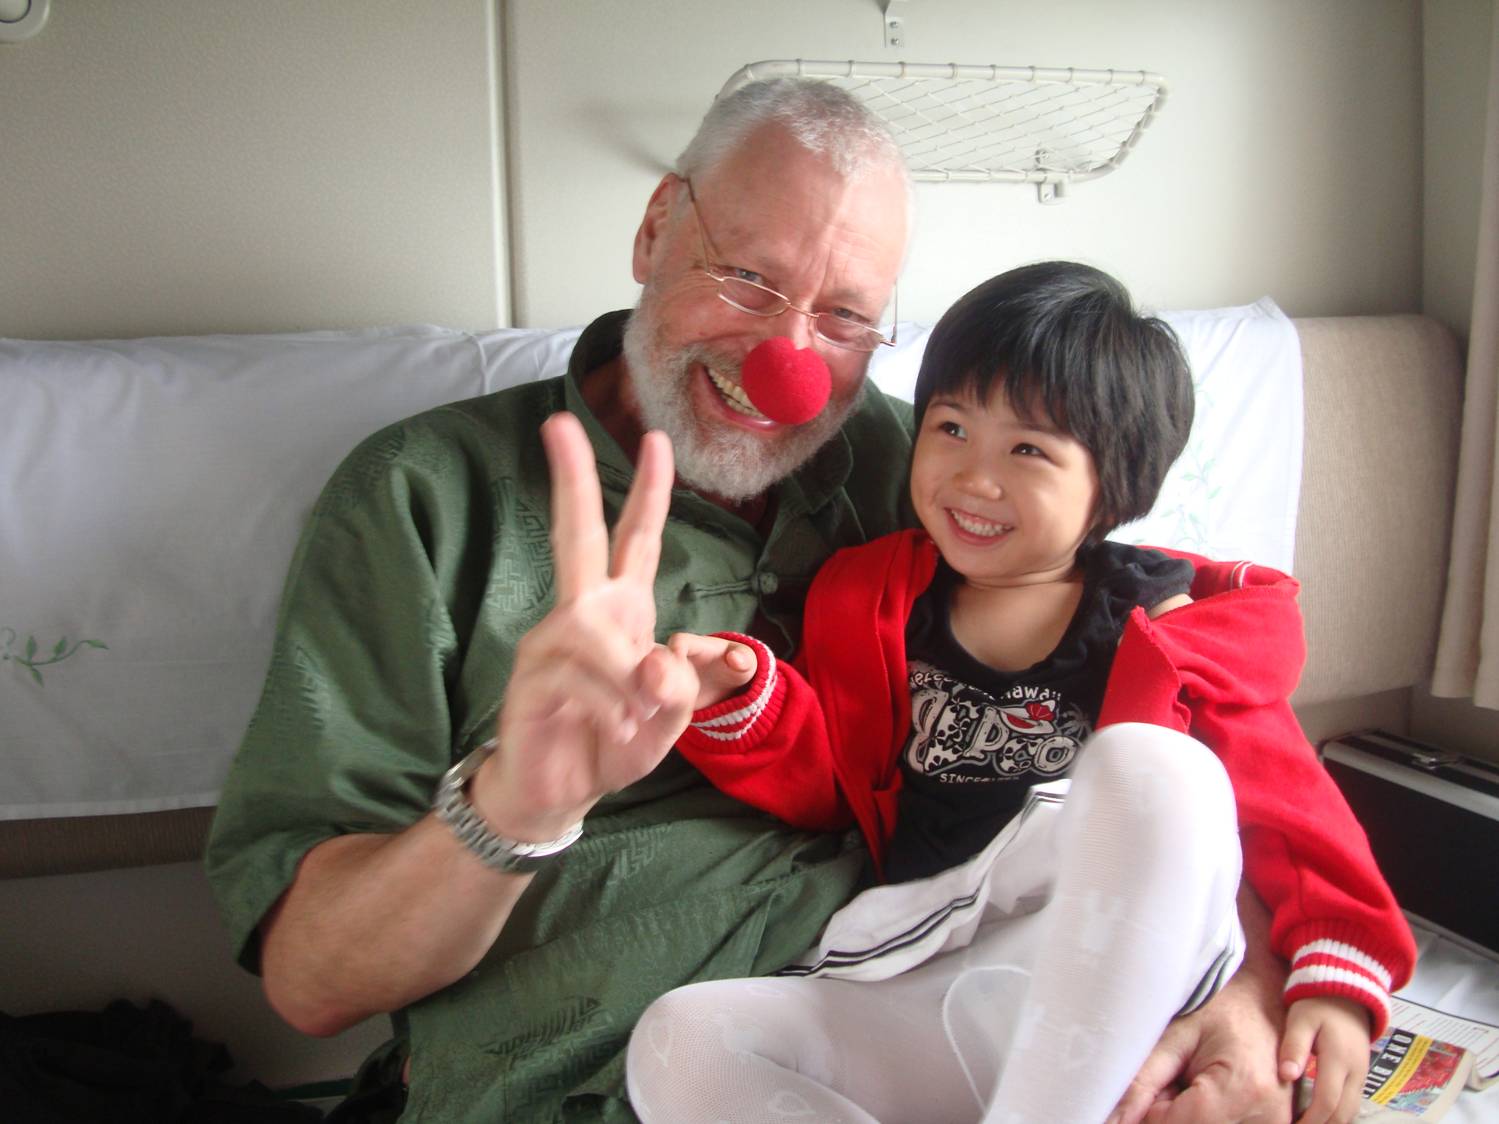 Always better to have a clown nose and not need one, than to need a clown nose and not have one. In the soft sleeper compartment from Guangzhou to Wuxi,  China.